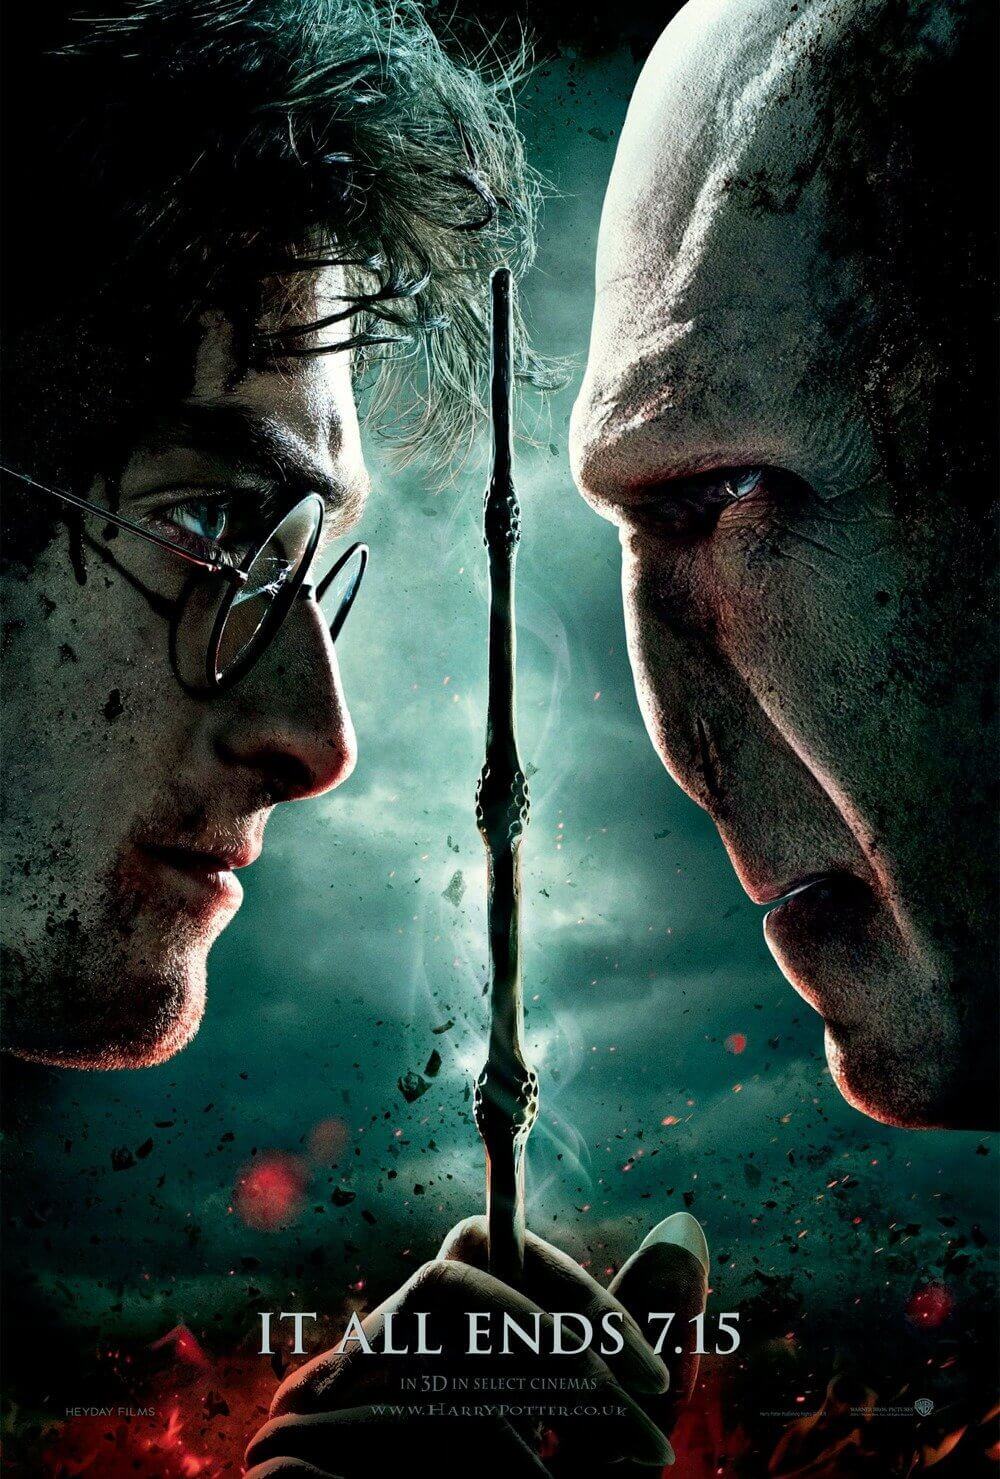 Harry Potter and the Deathly Hallows- Part 2